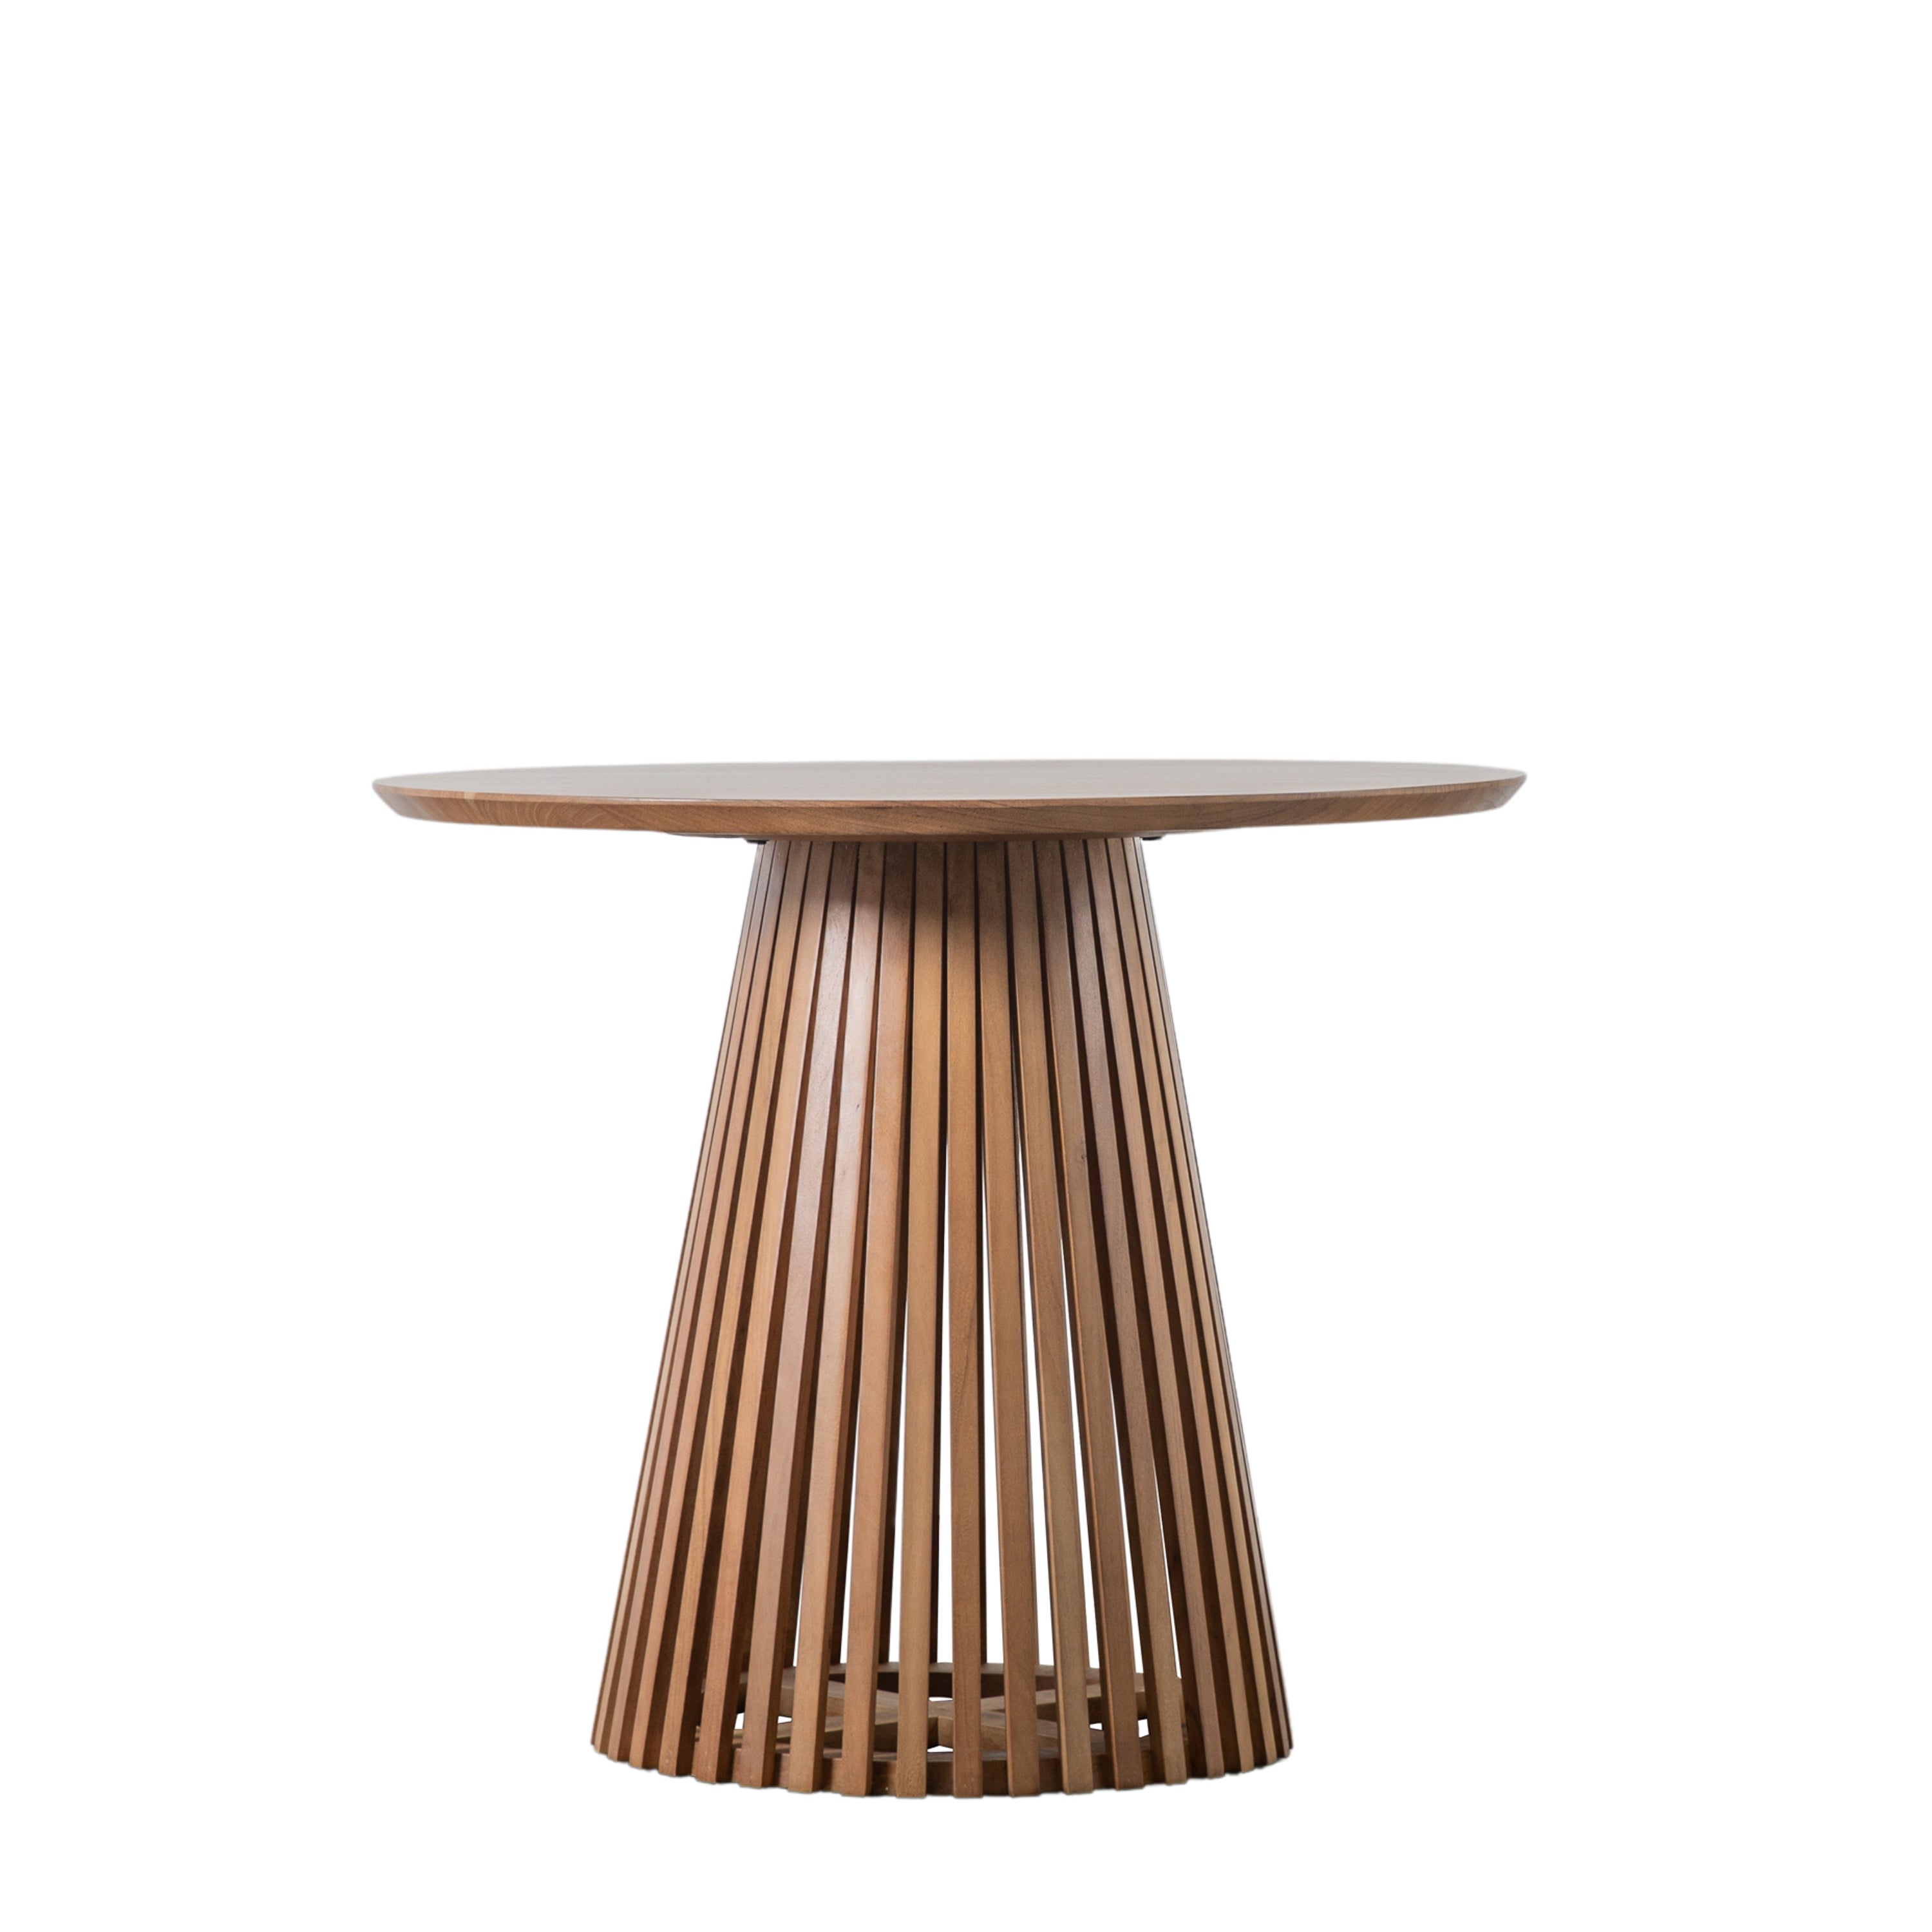 Brookes Slatted Dining Table